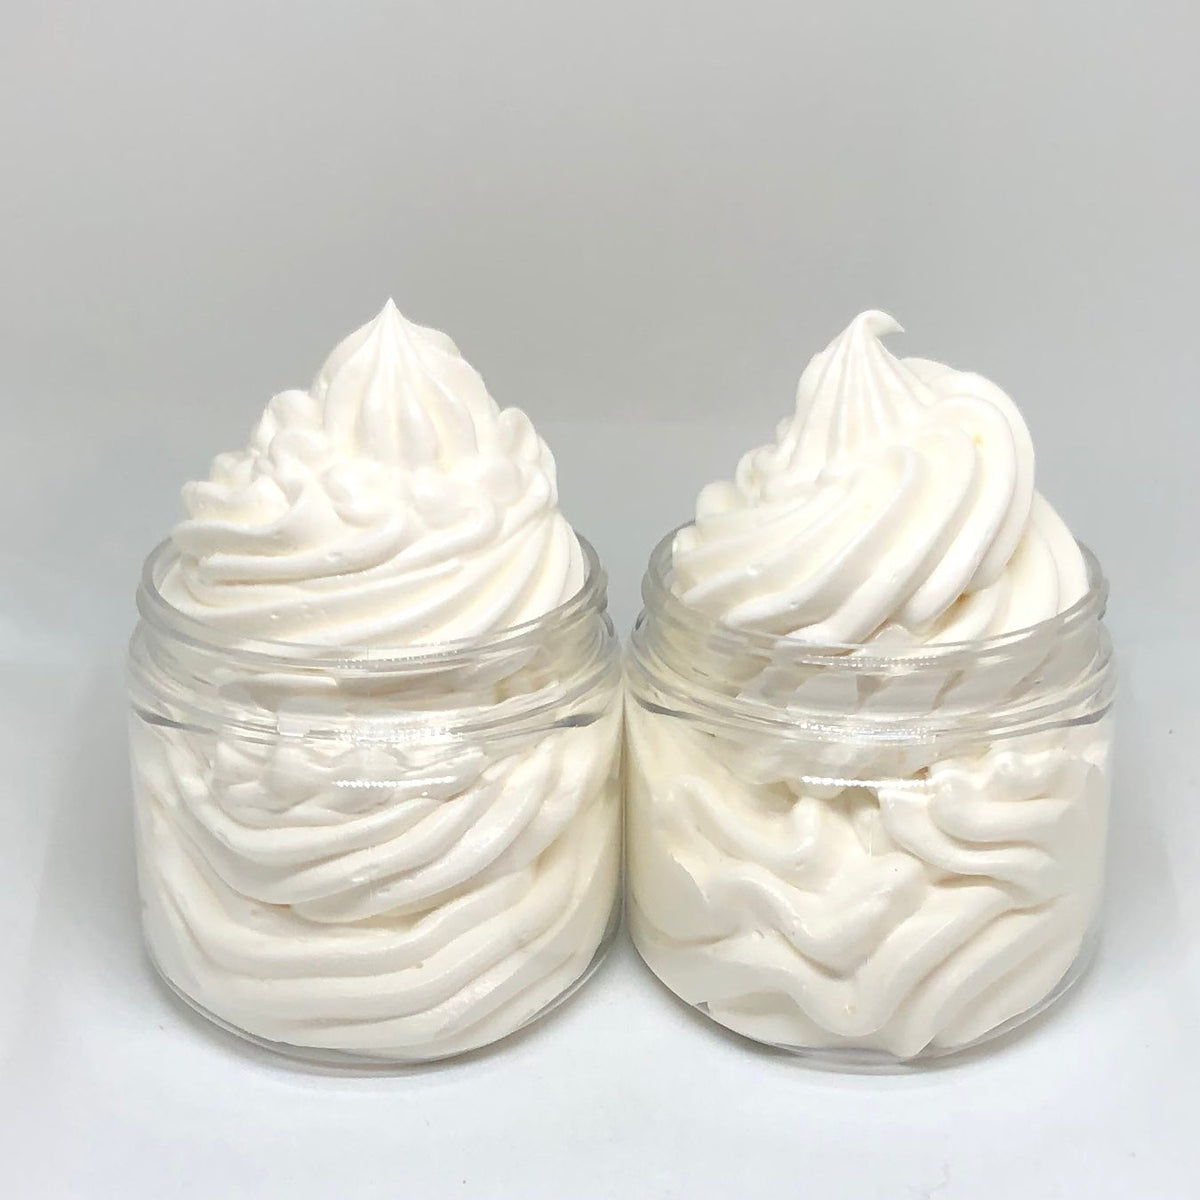 Unscented Whipped Body Butter